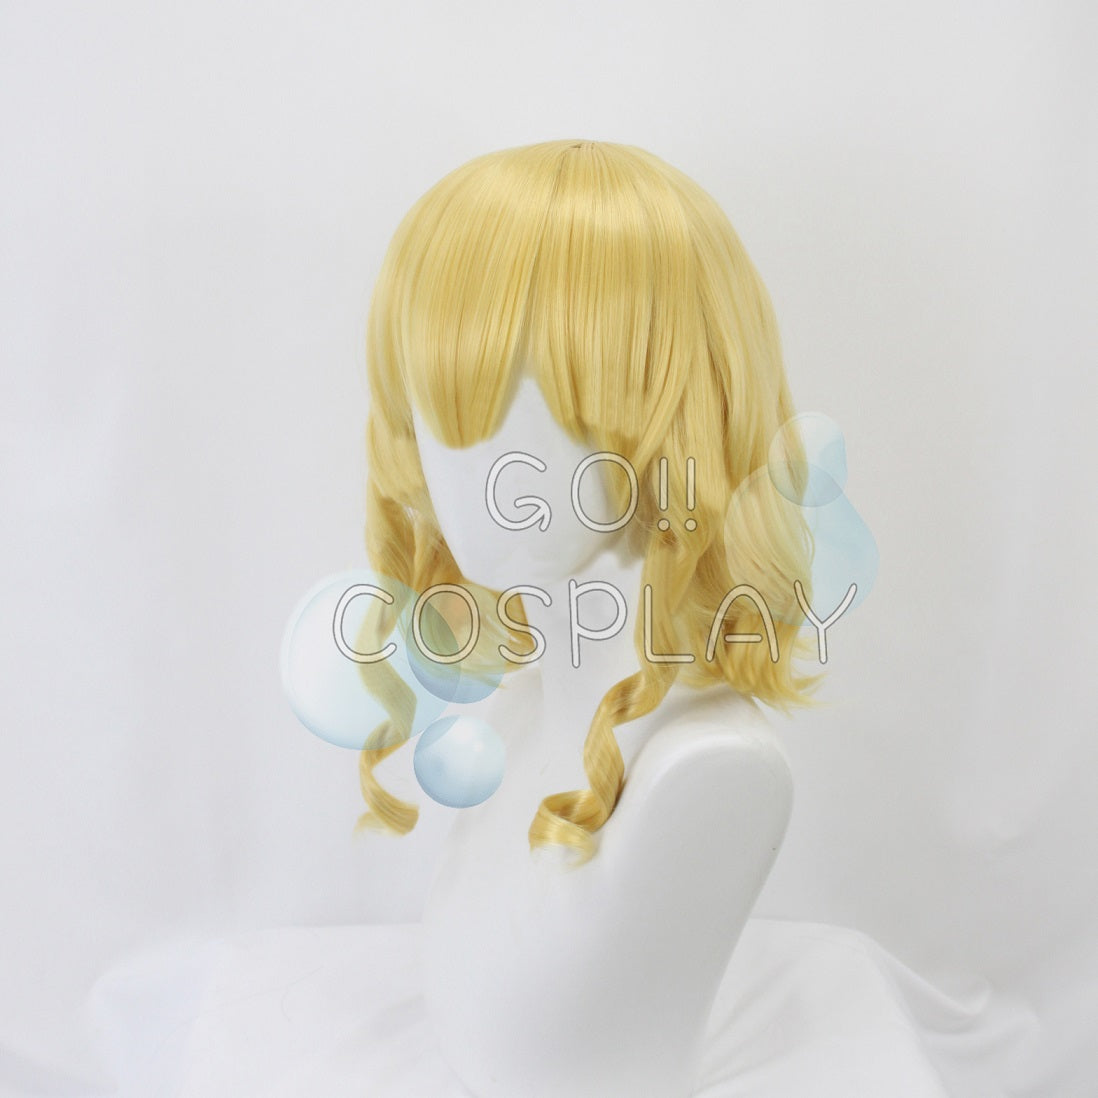 Constance Fire Emblem Cosplay Wig for Sale